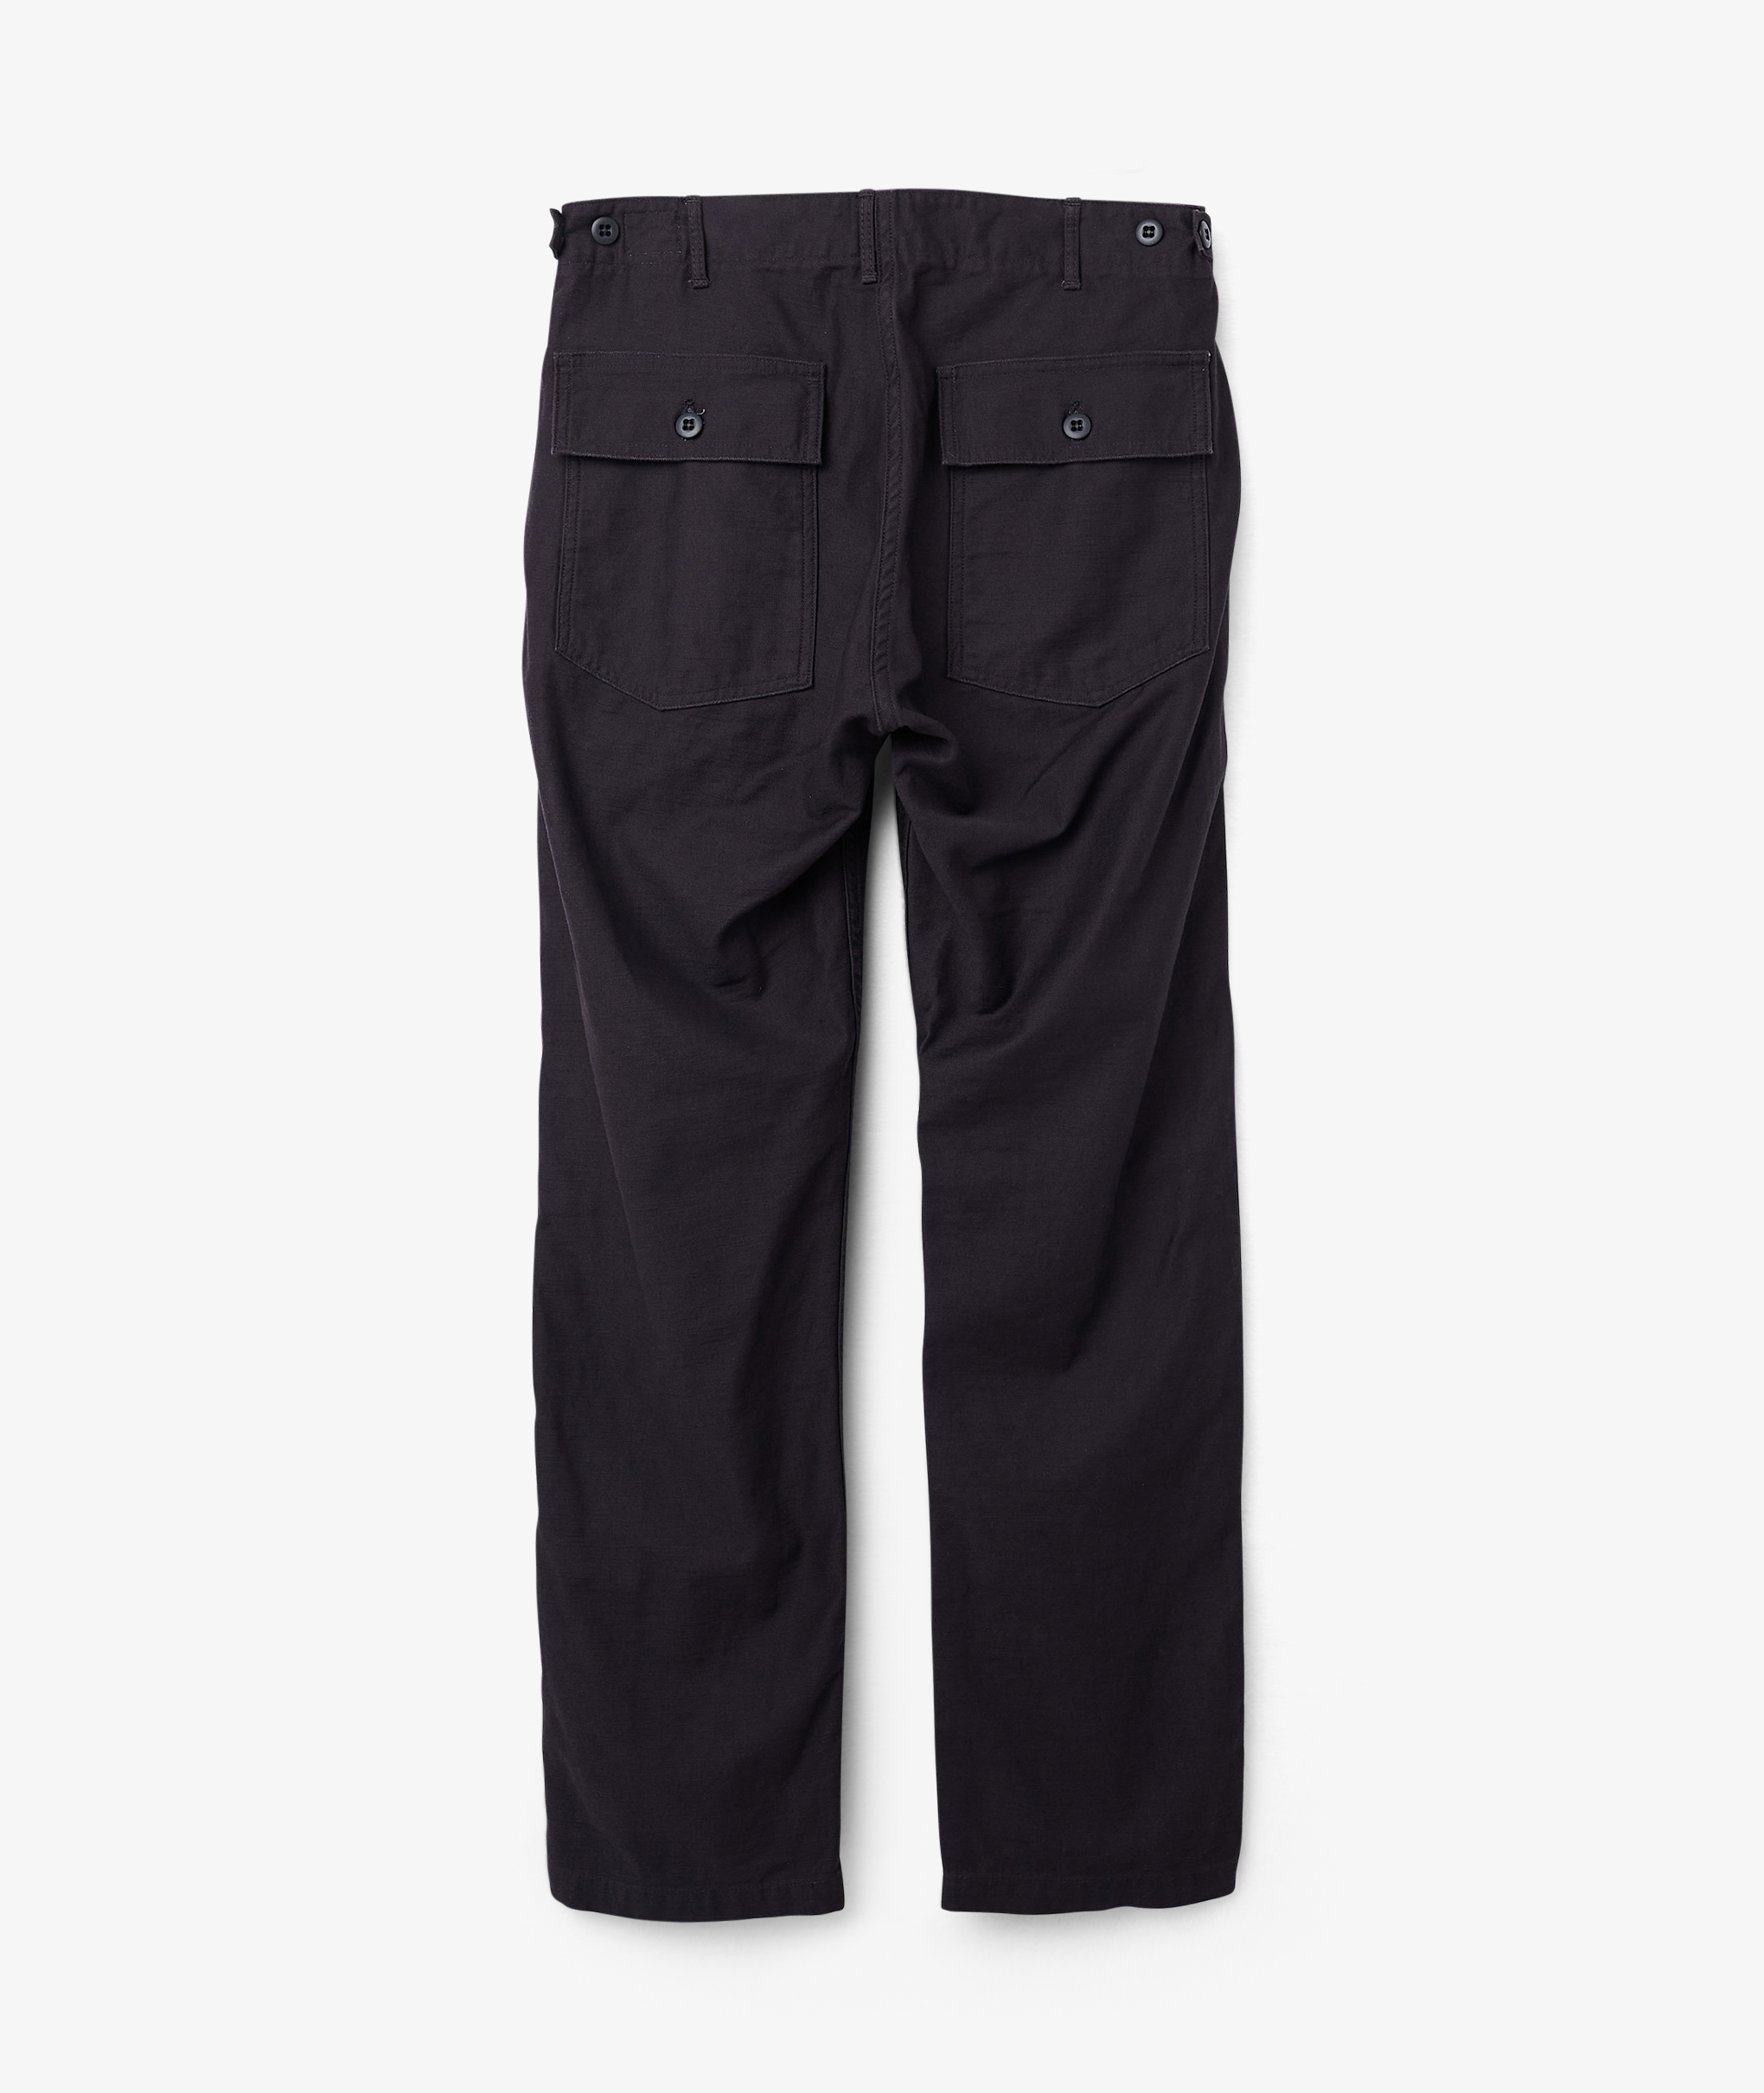 Norse Store  Shipping Worldwide - orSlow SLIM FIT FATIGUE PANTS - Black